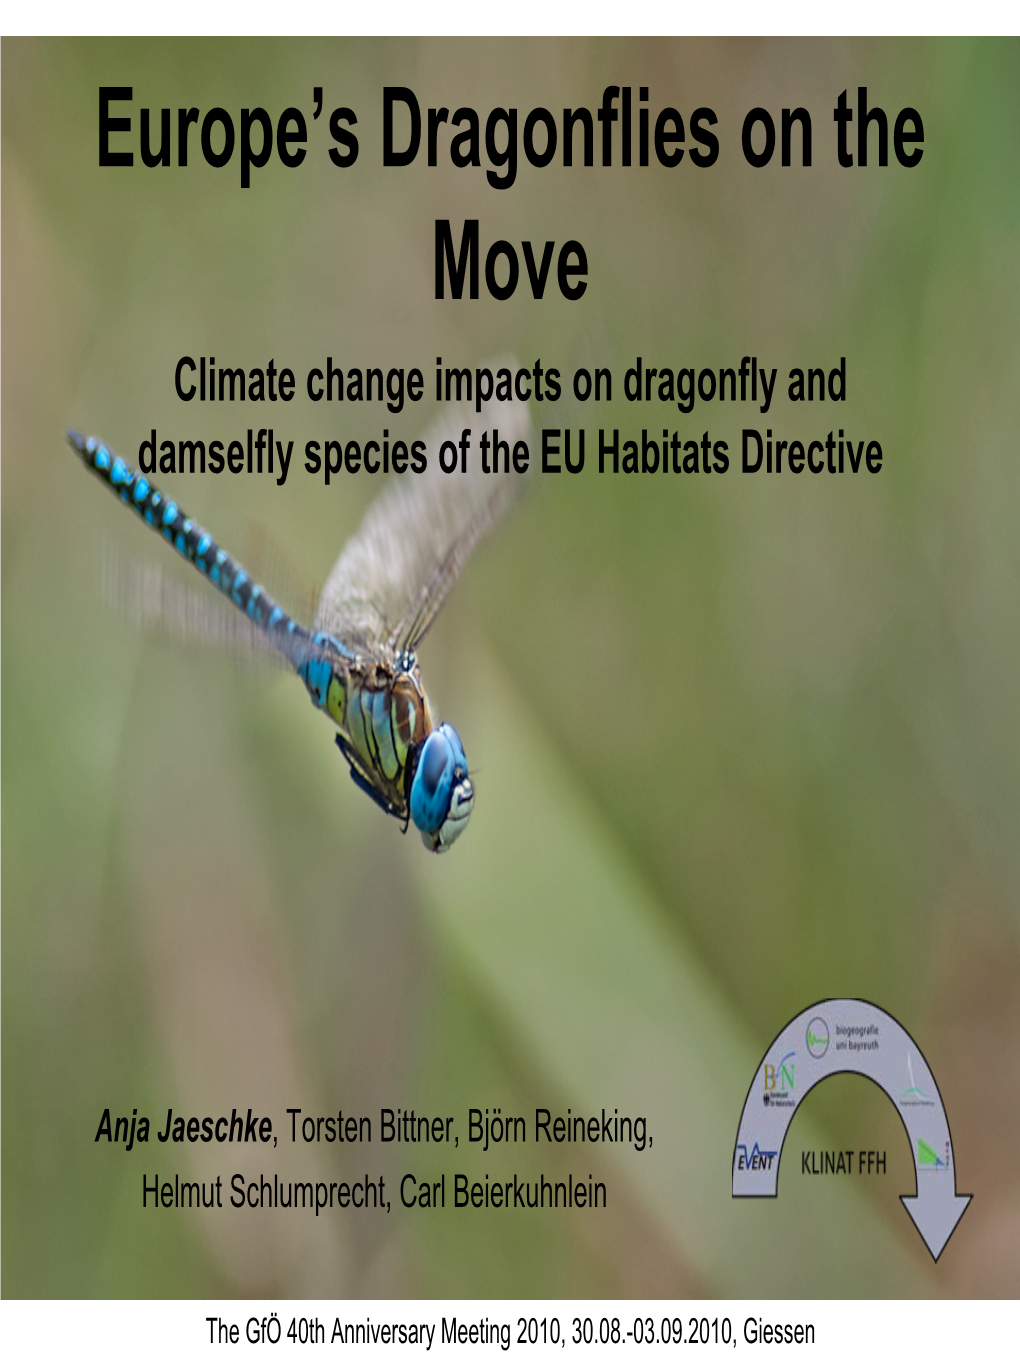 Europe's Dragonflies on the Move